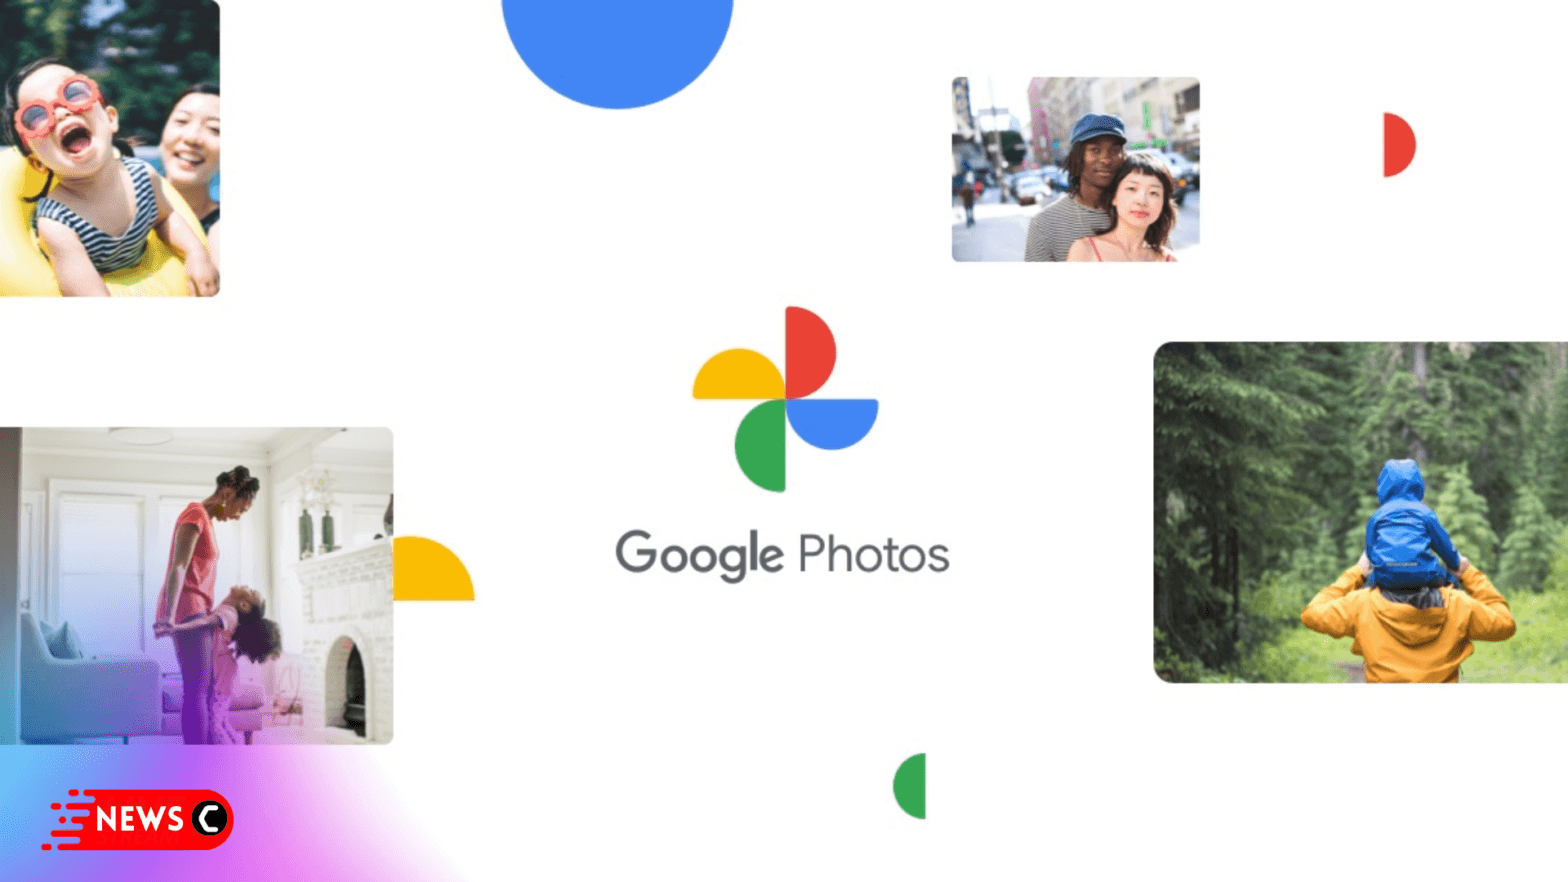 Your Old Images On Google photos are Getting Corrupted